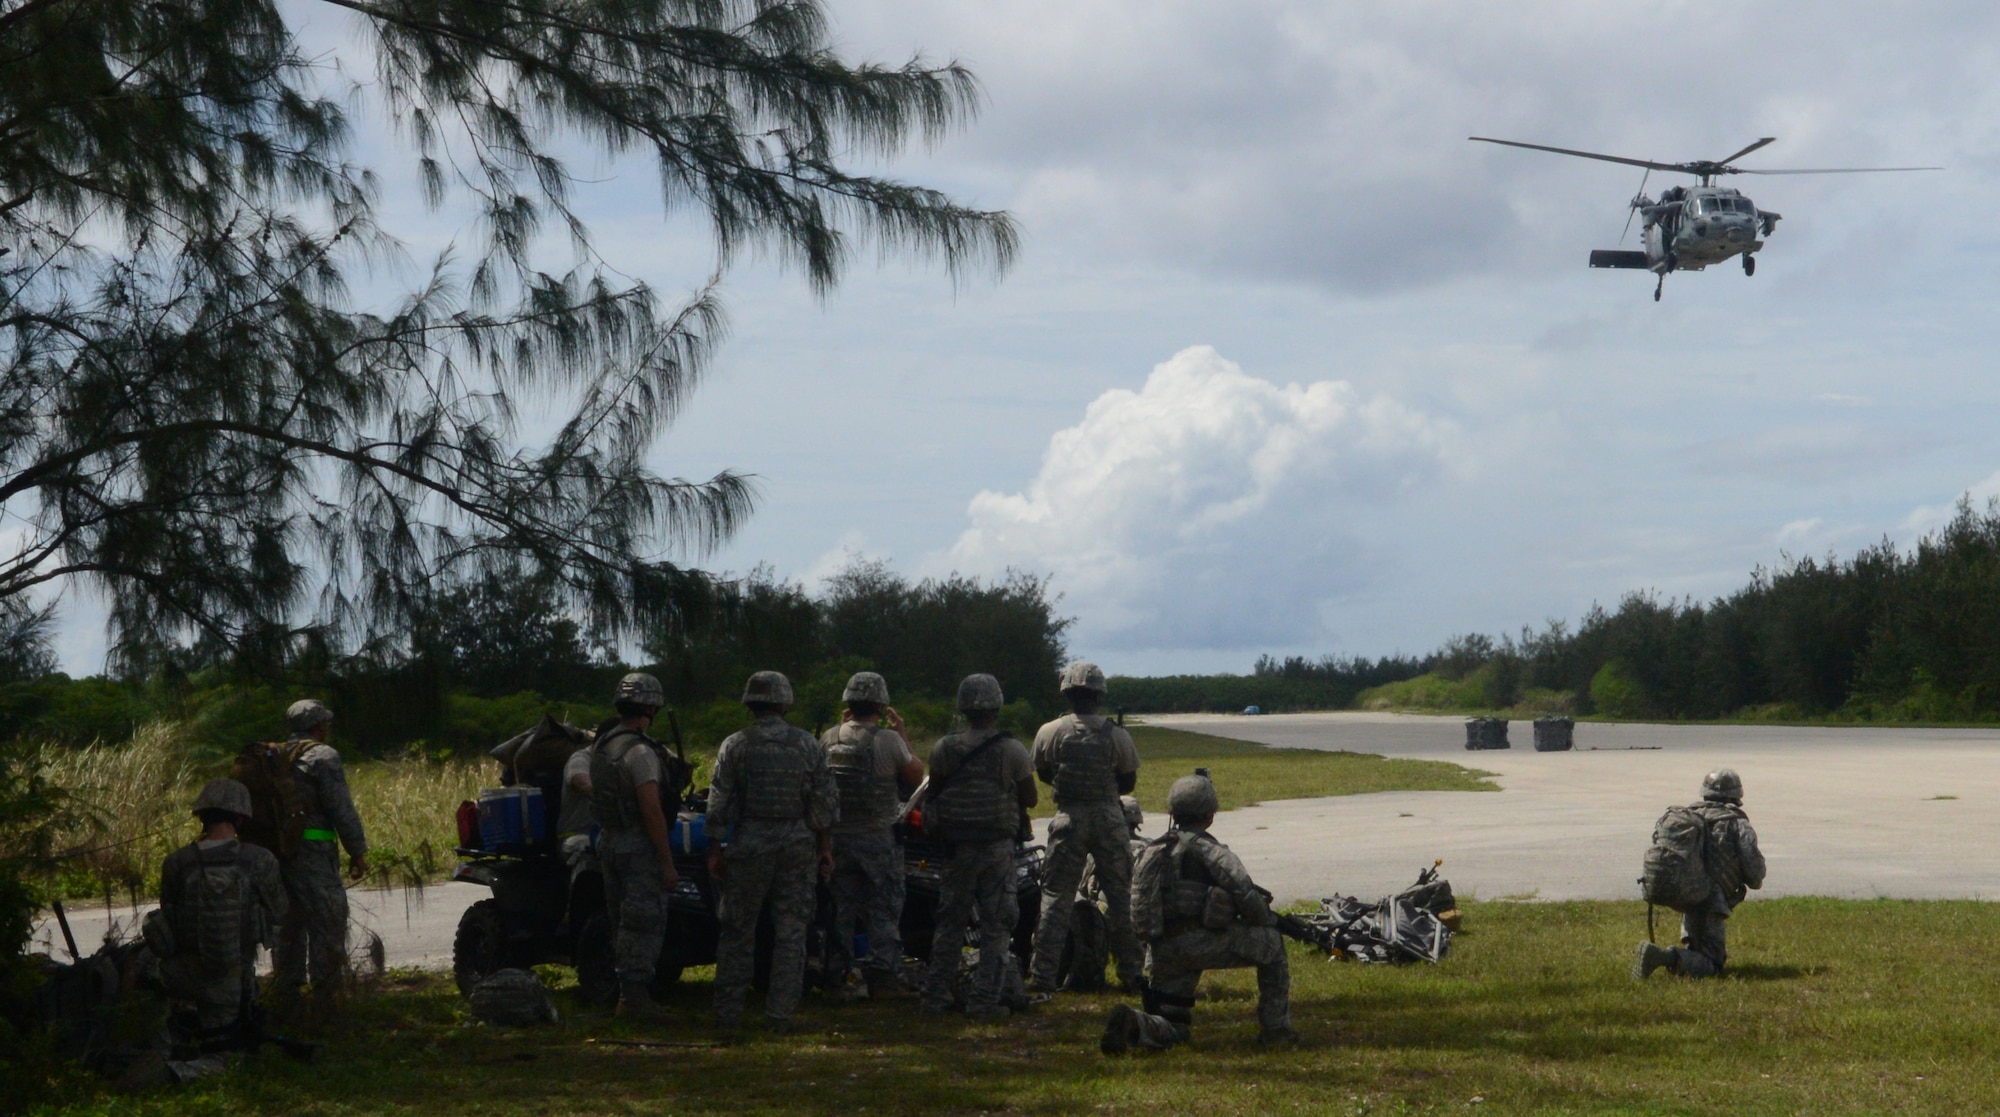 Airmen from the 36th Civil Engineer Squadron, 36th Mobility Response Squadron and 736th Security Forces Squadron watch as a helicopter crew drops a sling load during a training exercise Oct. 29, 2013, on Naval Base Guam. The scenario was designed to test the Airmen’s ability to secure and assess a potentially hostile airstrip’s suitability for follow-on Department of Defense aircraft. (U.S. Air Force photo by Airman 1st Class Emily A. Bradley/Released)